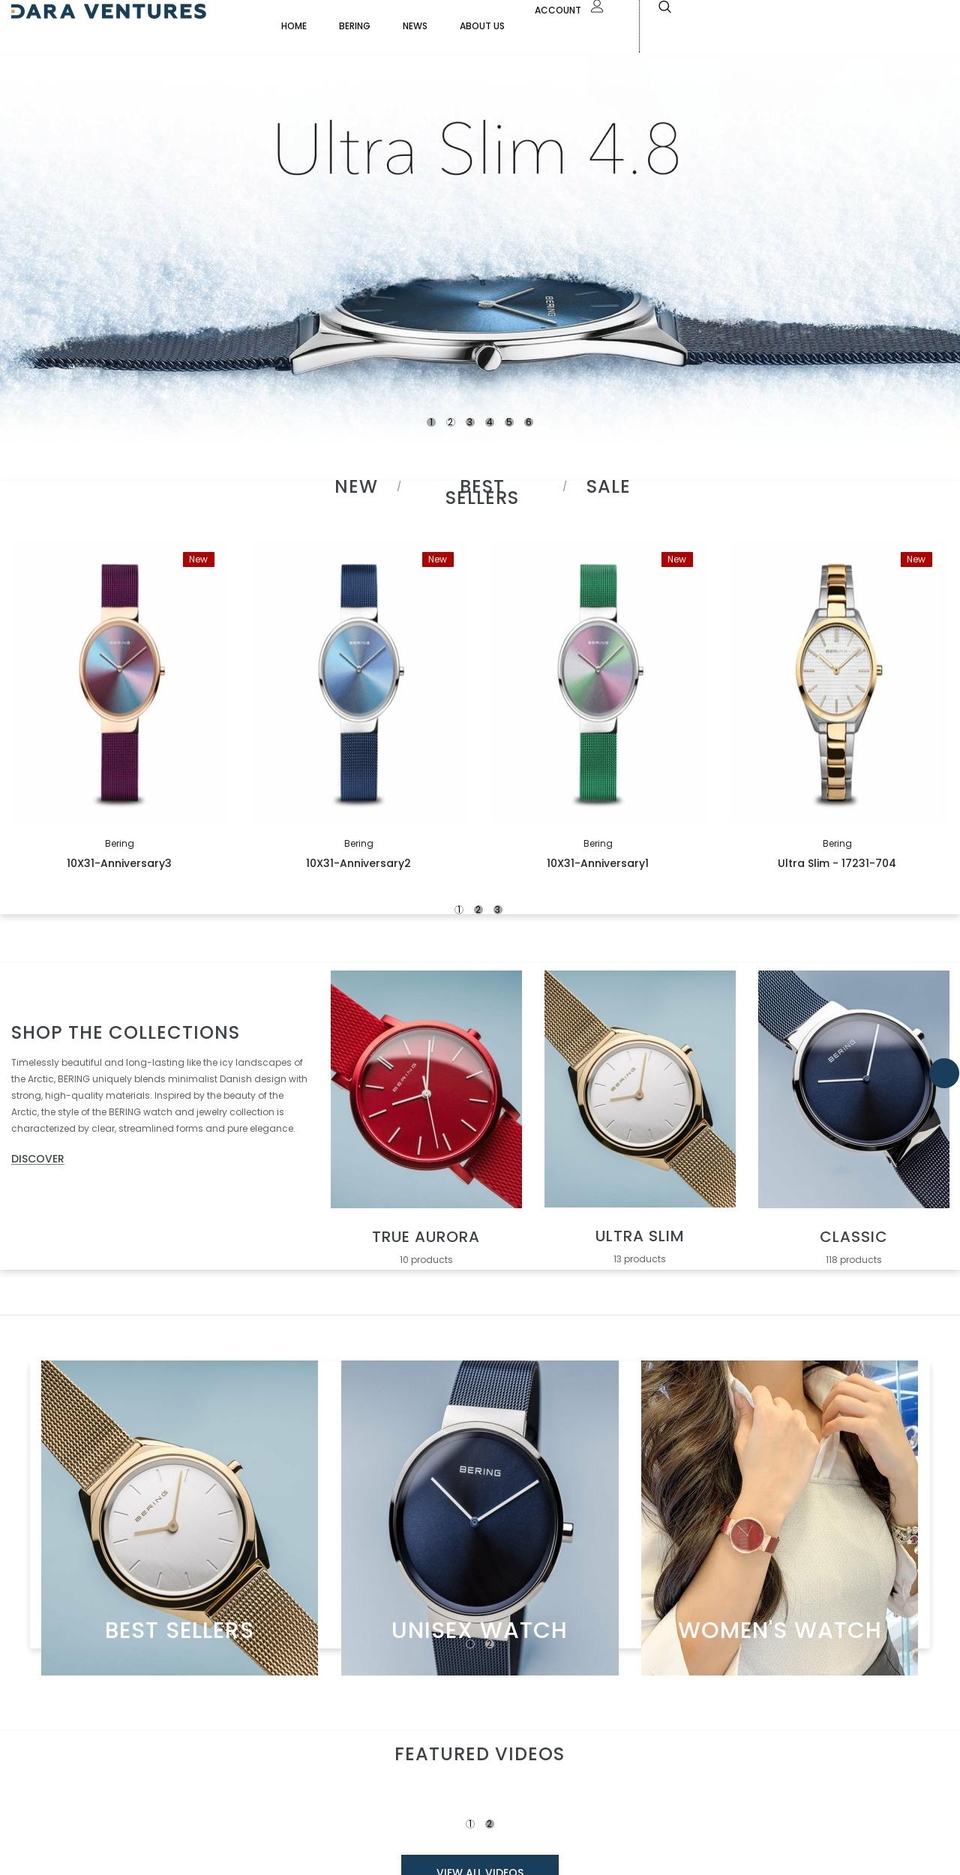 WATCHES Shopify theme site example daraventures.com